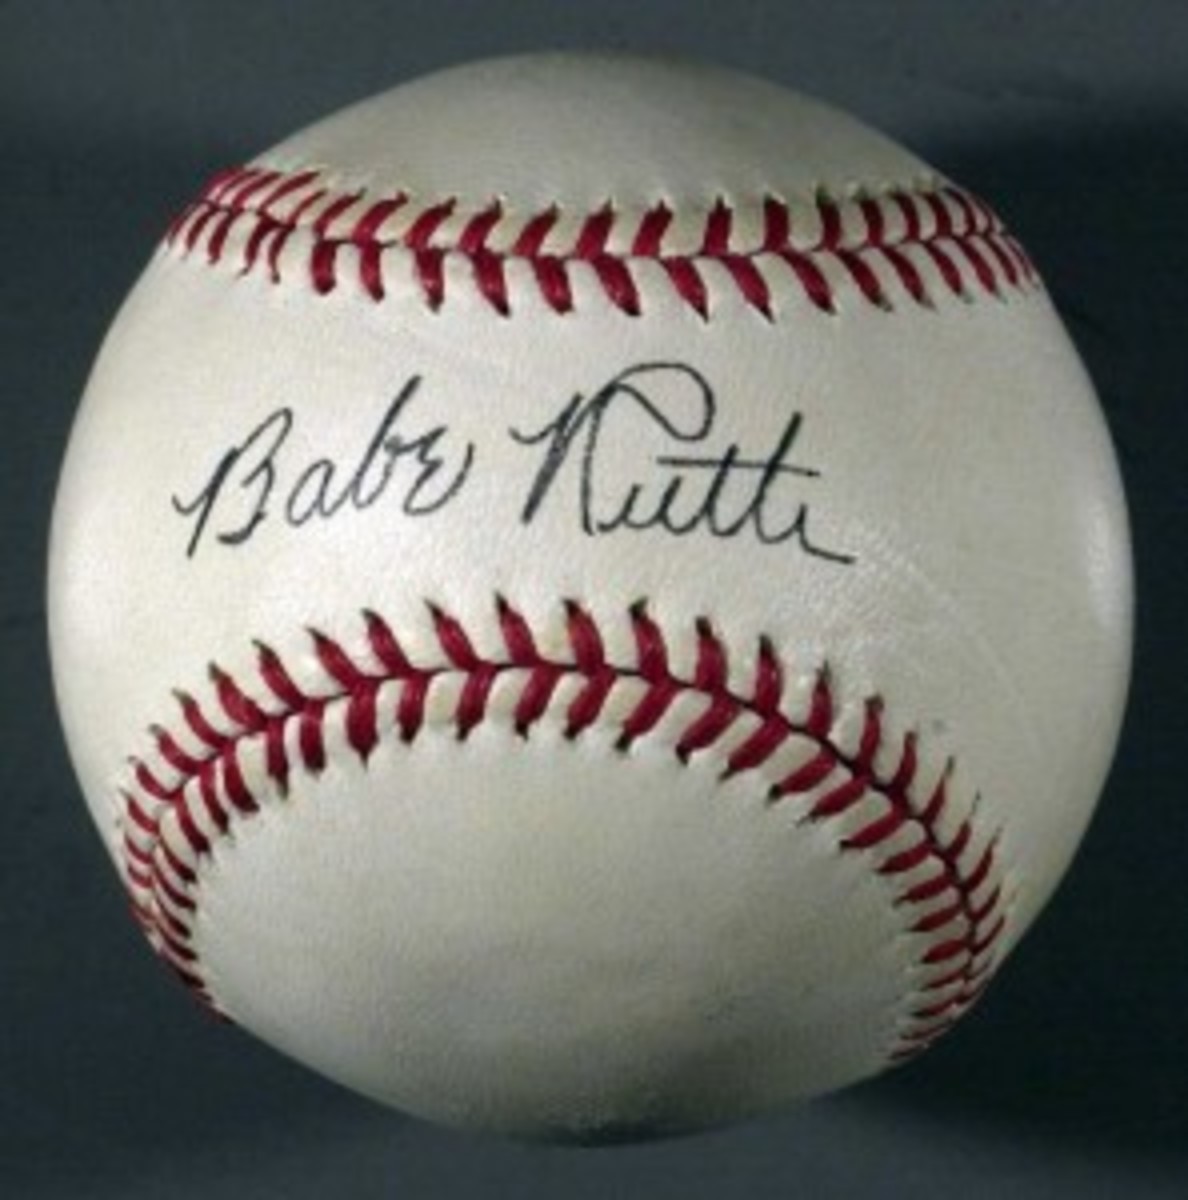 A fake Babe Ruth baseball, signed on the sweet spot.